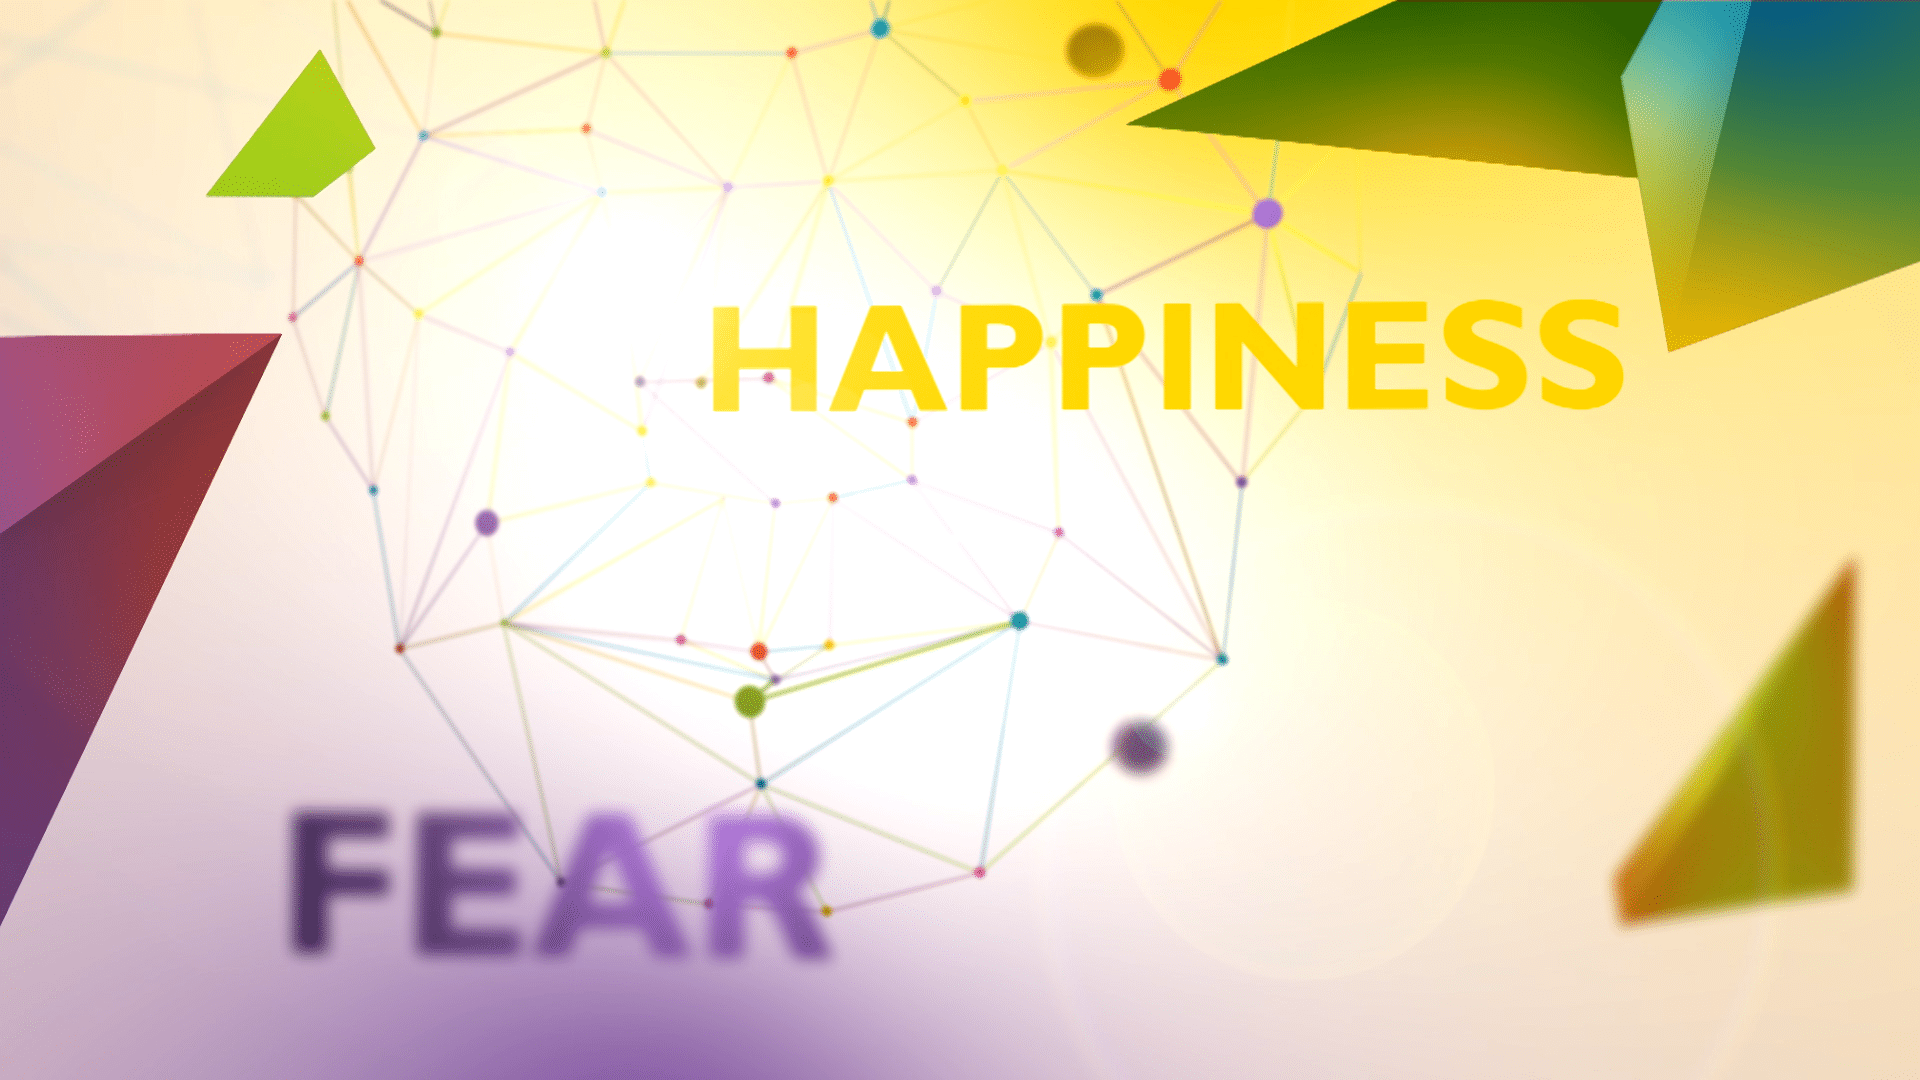 90 Second Animated Explainer Video - happiness and fear text on colourful background